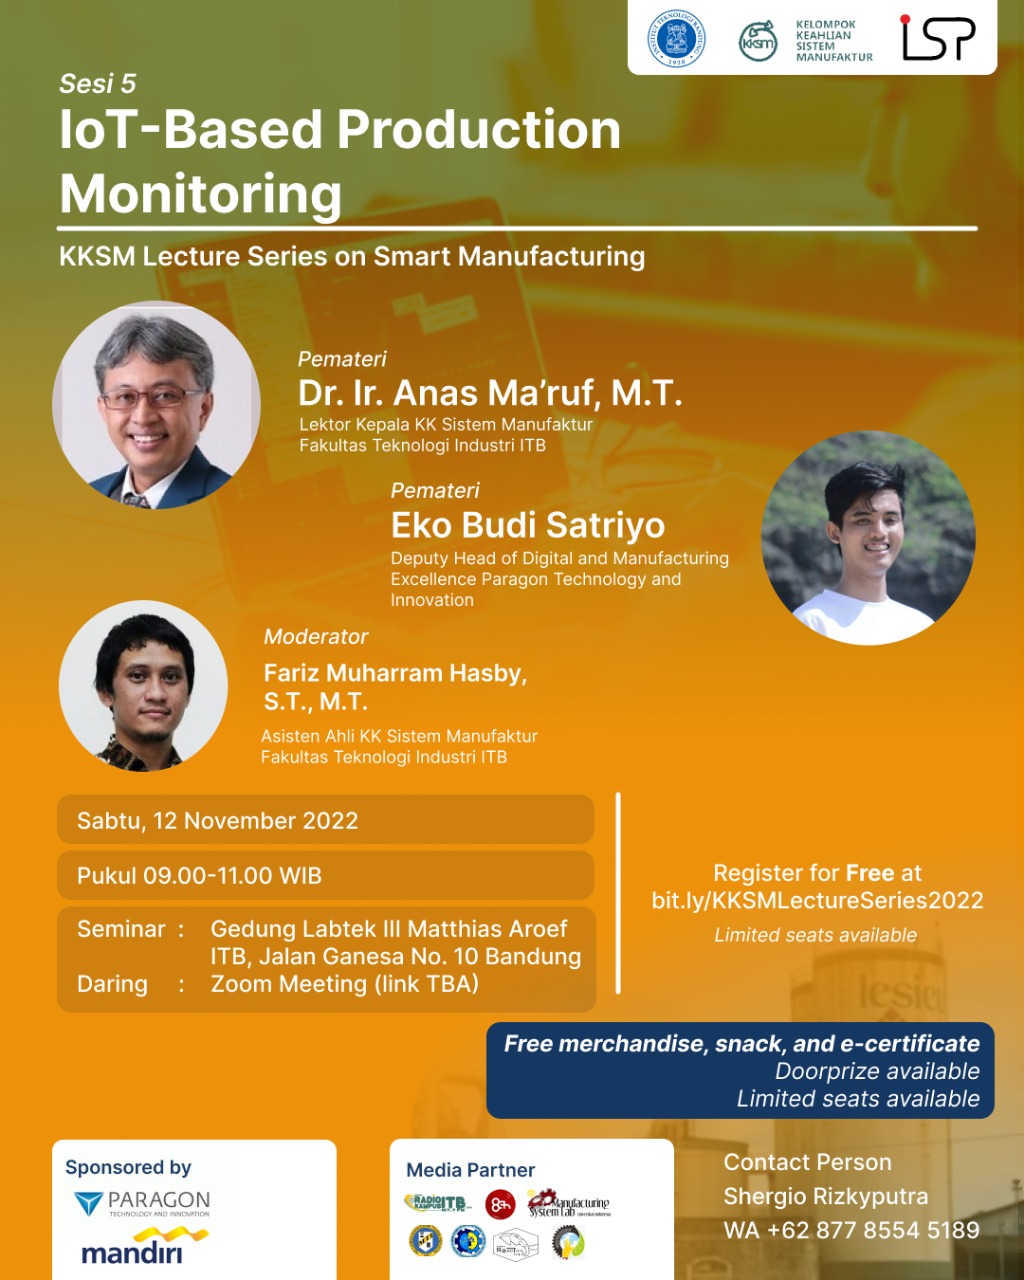 KKSM Lecture Series on Smart Manufacturing